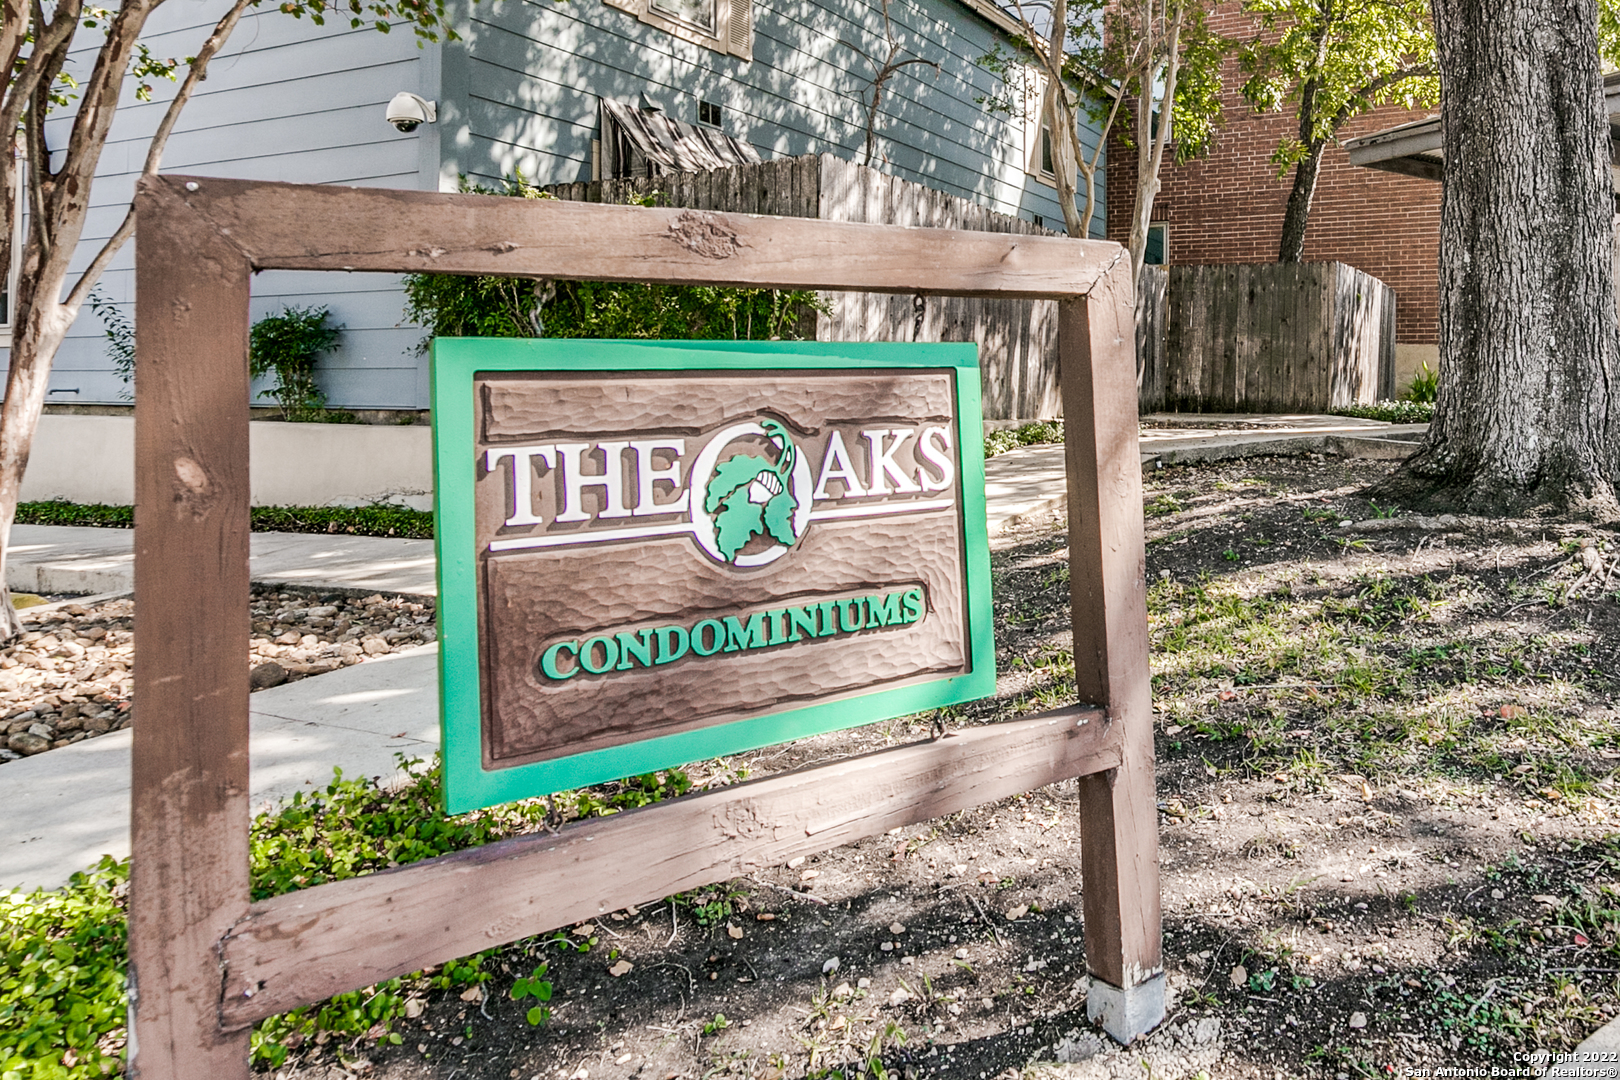 The Oaks Condominium community offers an upscale, carefree lifestyle. Conveniently located just inside Loop 410 in the desirable Alamo Heights School District, quick access is available to the airport, Hwy 281, IH 35, Fort Sam Houston, Randolph AFB, UIW and Trinity University. This spacious 2 bedroom, 2 bath upstairs unit is move-in ready! Amenities include wood laminate flooring throughout, modern tract lighting in the living area and a bright updated interior. This extremely well-maintained condominium complex features refreshed building exteriors, splendid oak covered grounds, reserved parking, community pool and professional on-site management. Low-cost monthly utilities due to commercial billing rate. An excellent buy, this unit is priced to sell quickly!